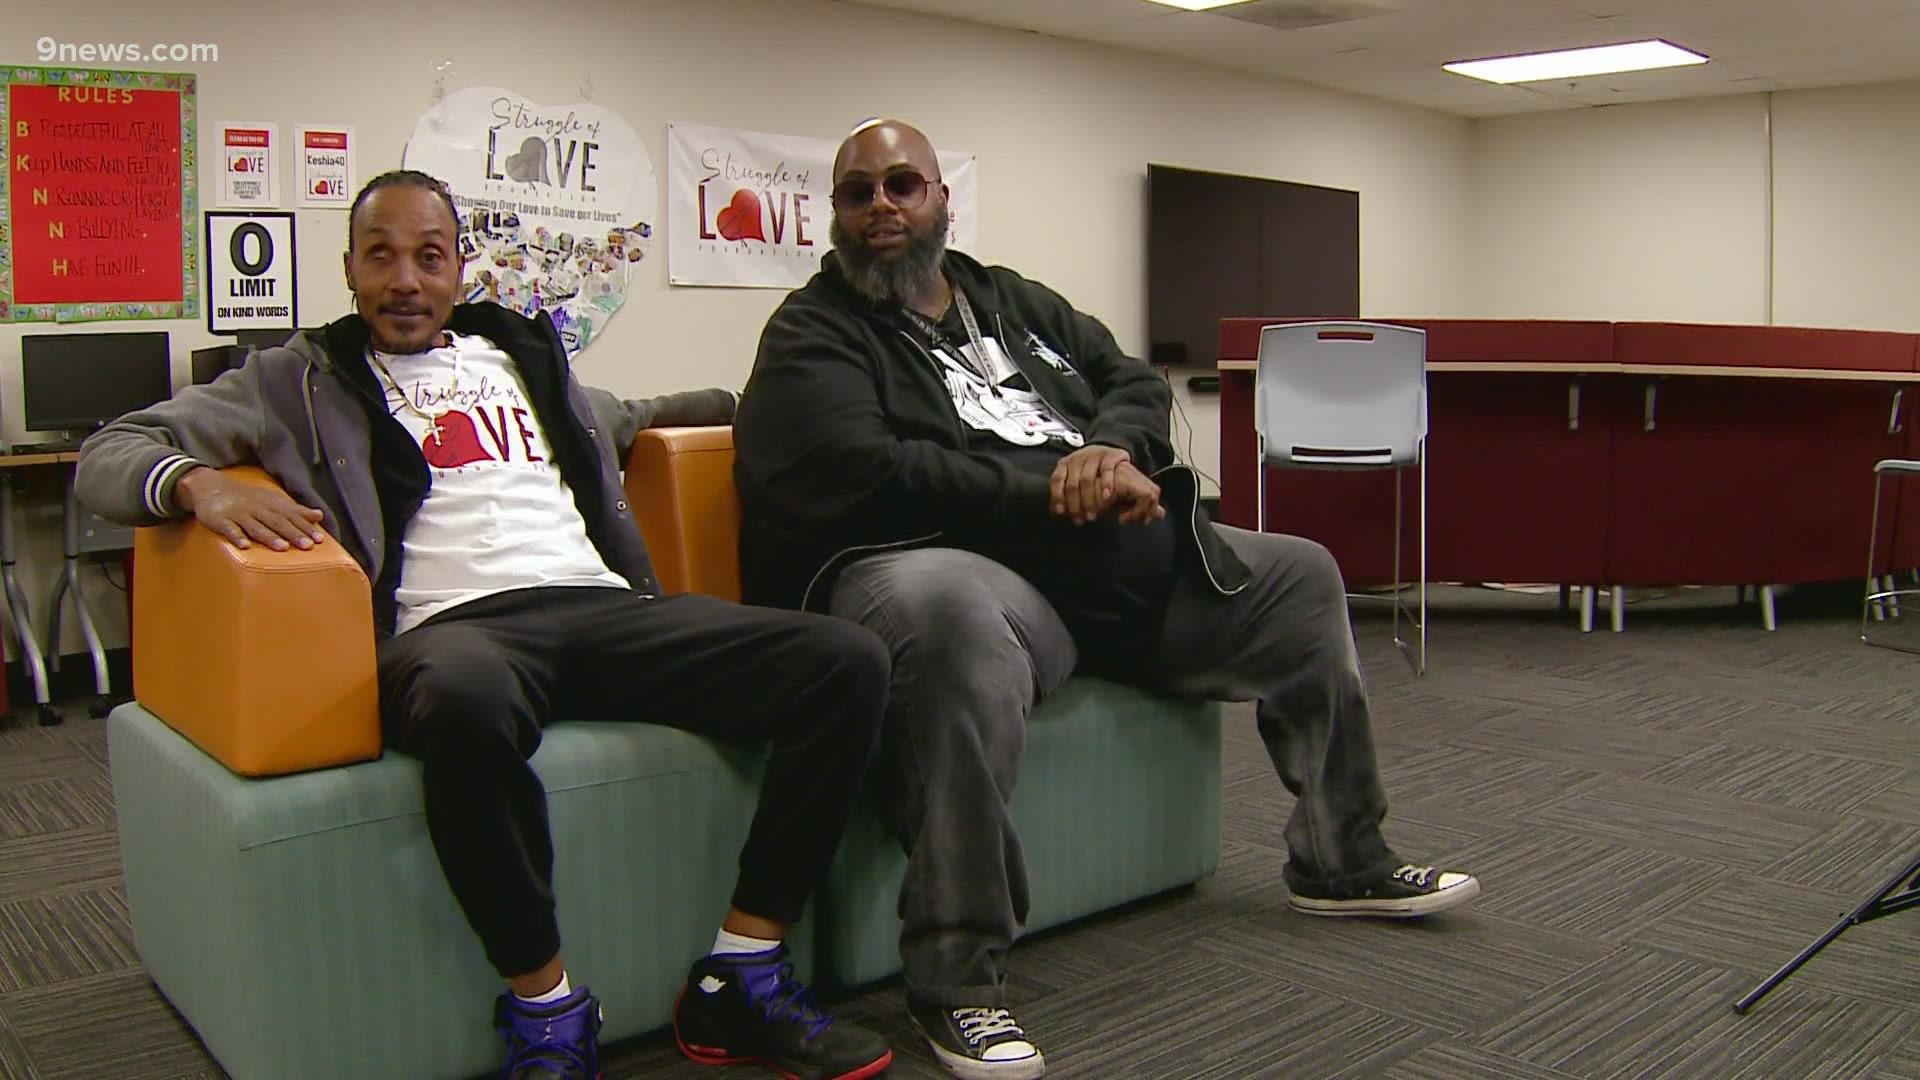 The Struggle of Love Foundation is trying to reach out to kids to prevent violence from happening.